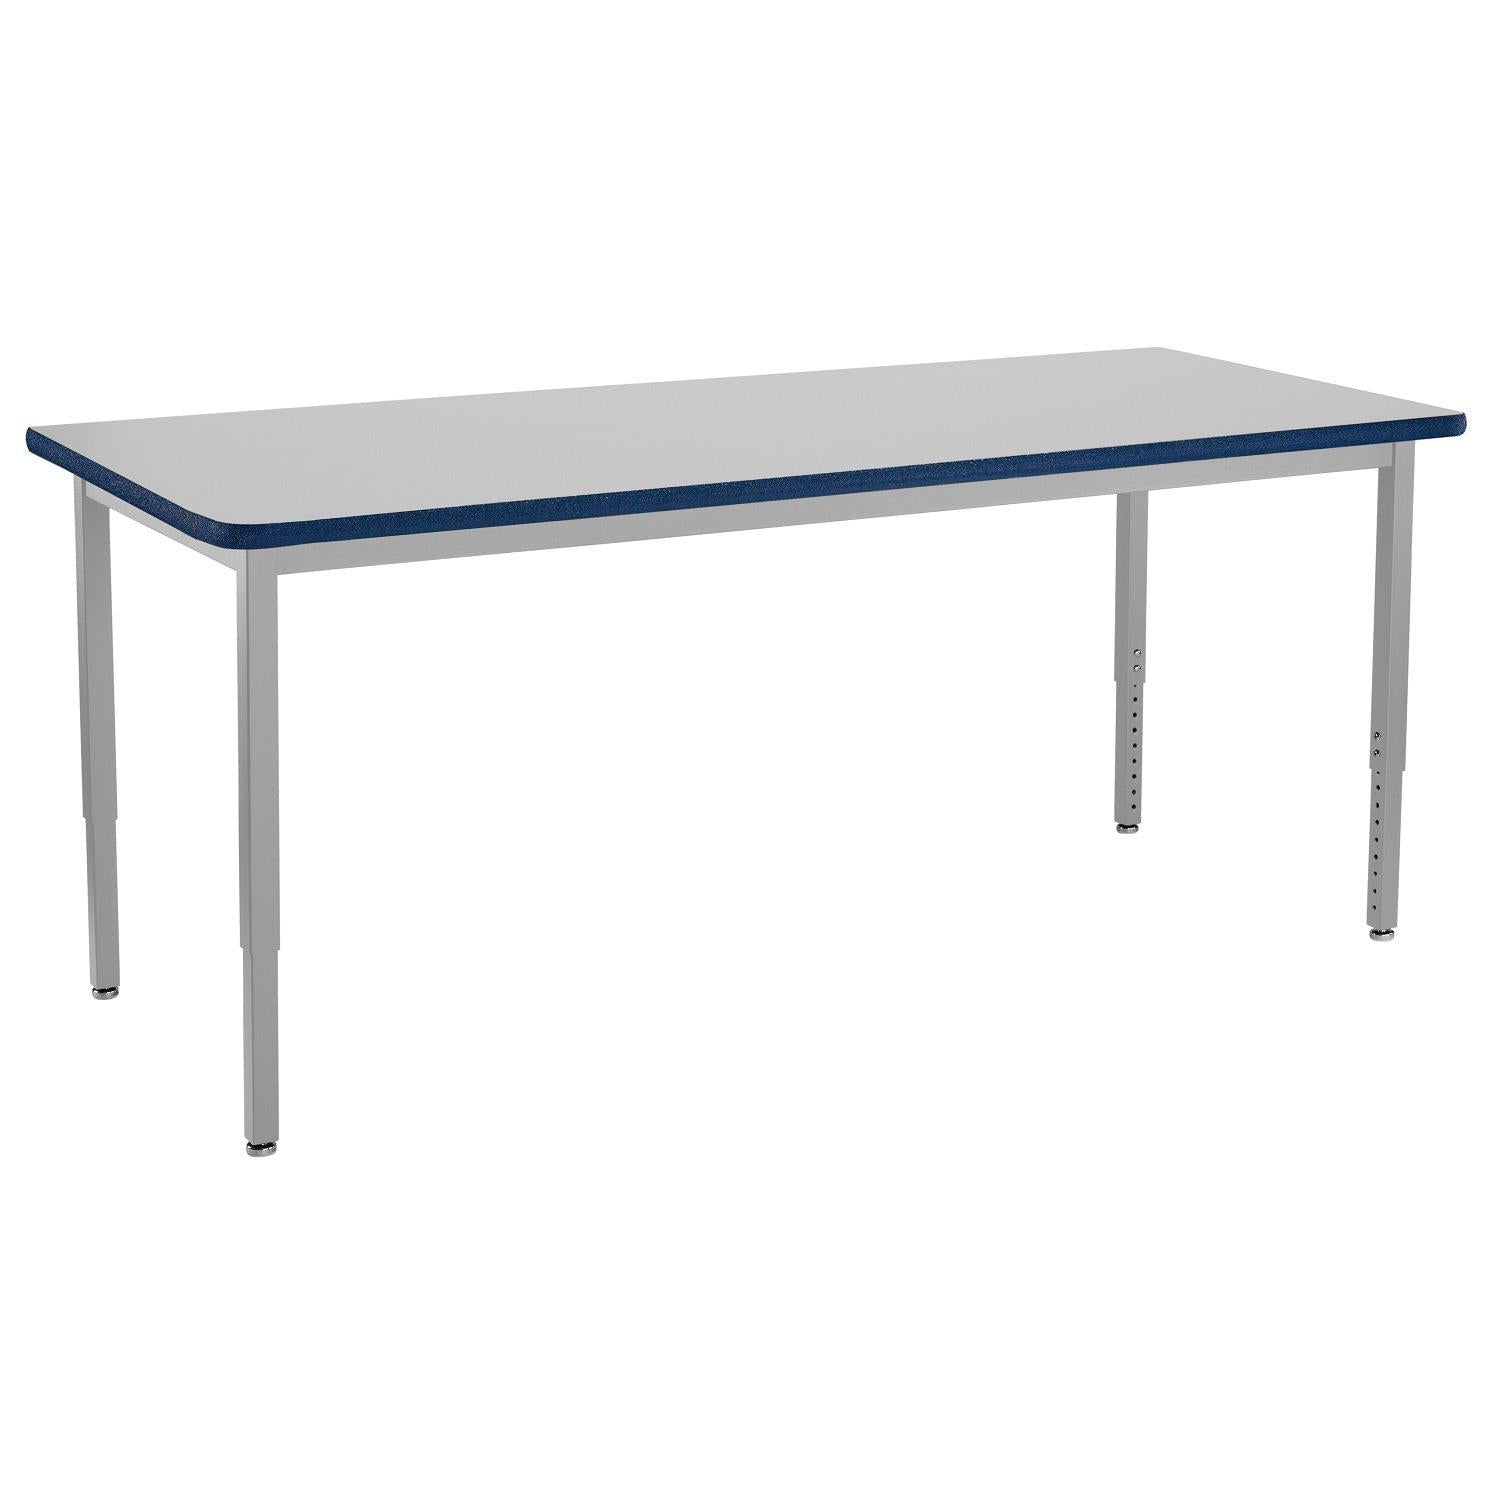 Heavy-Duty Height-Adjustable Utility Table, Soft Grey Frame, 30" x 84", Supreme High-Pressure Laminate Top with Black ProtectEdge